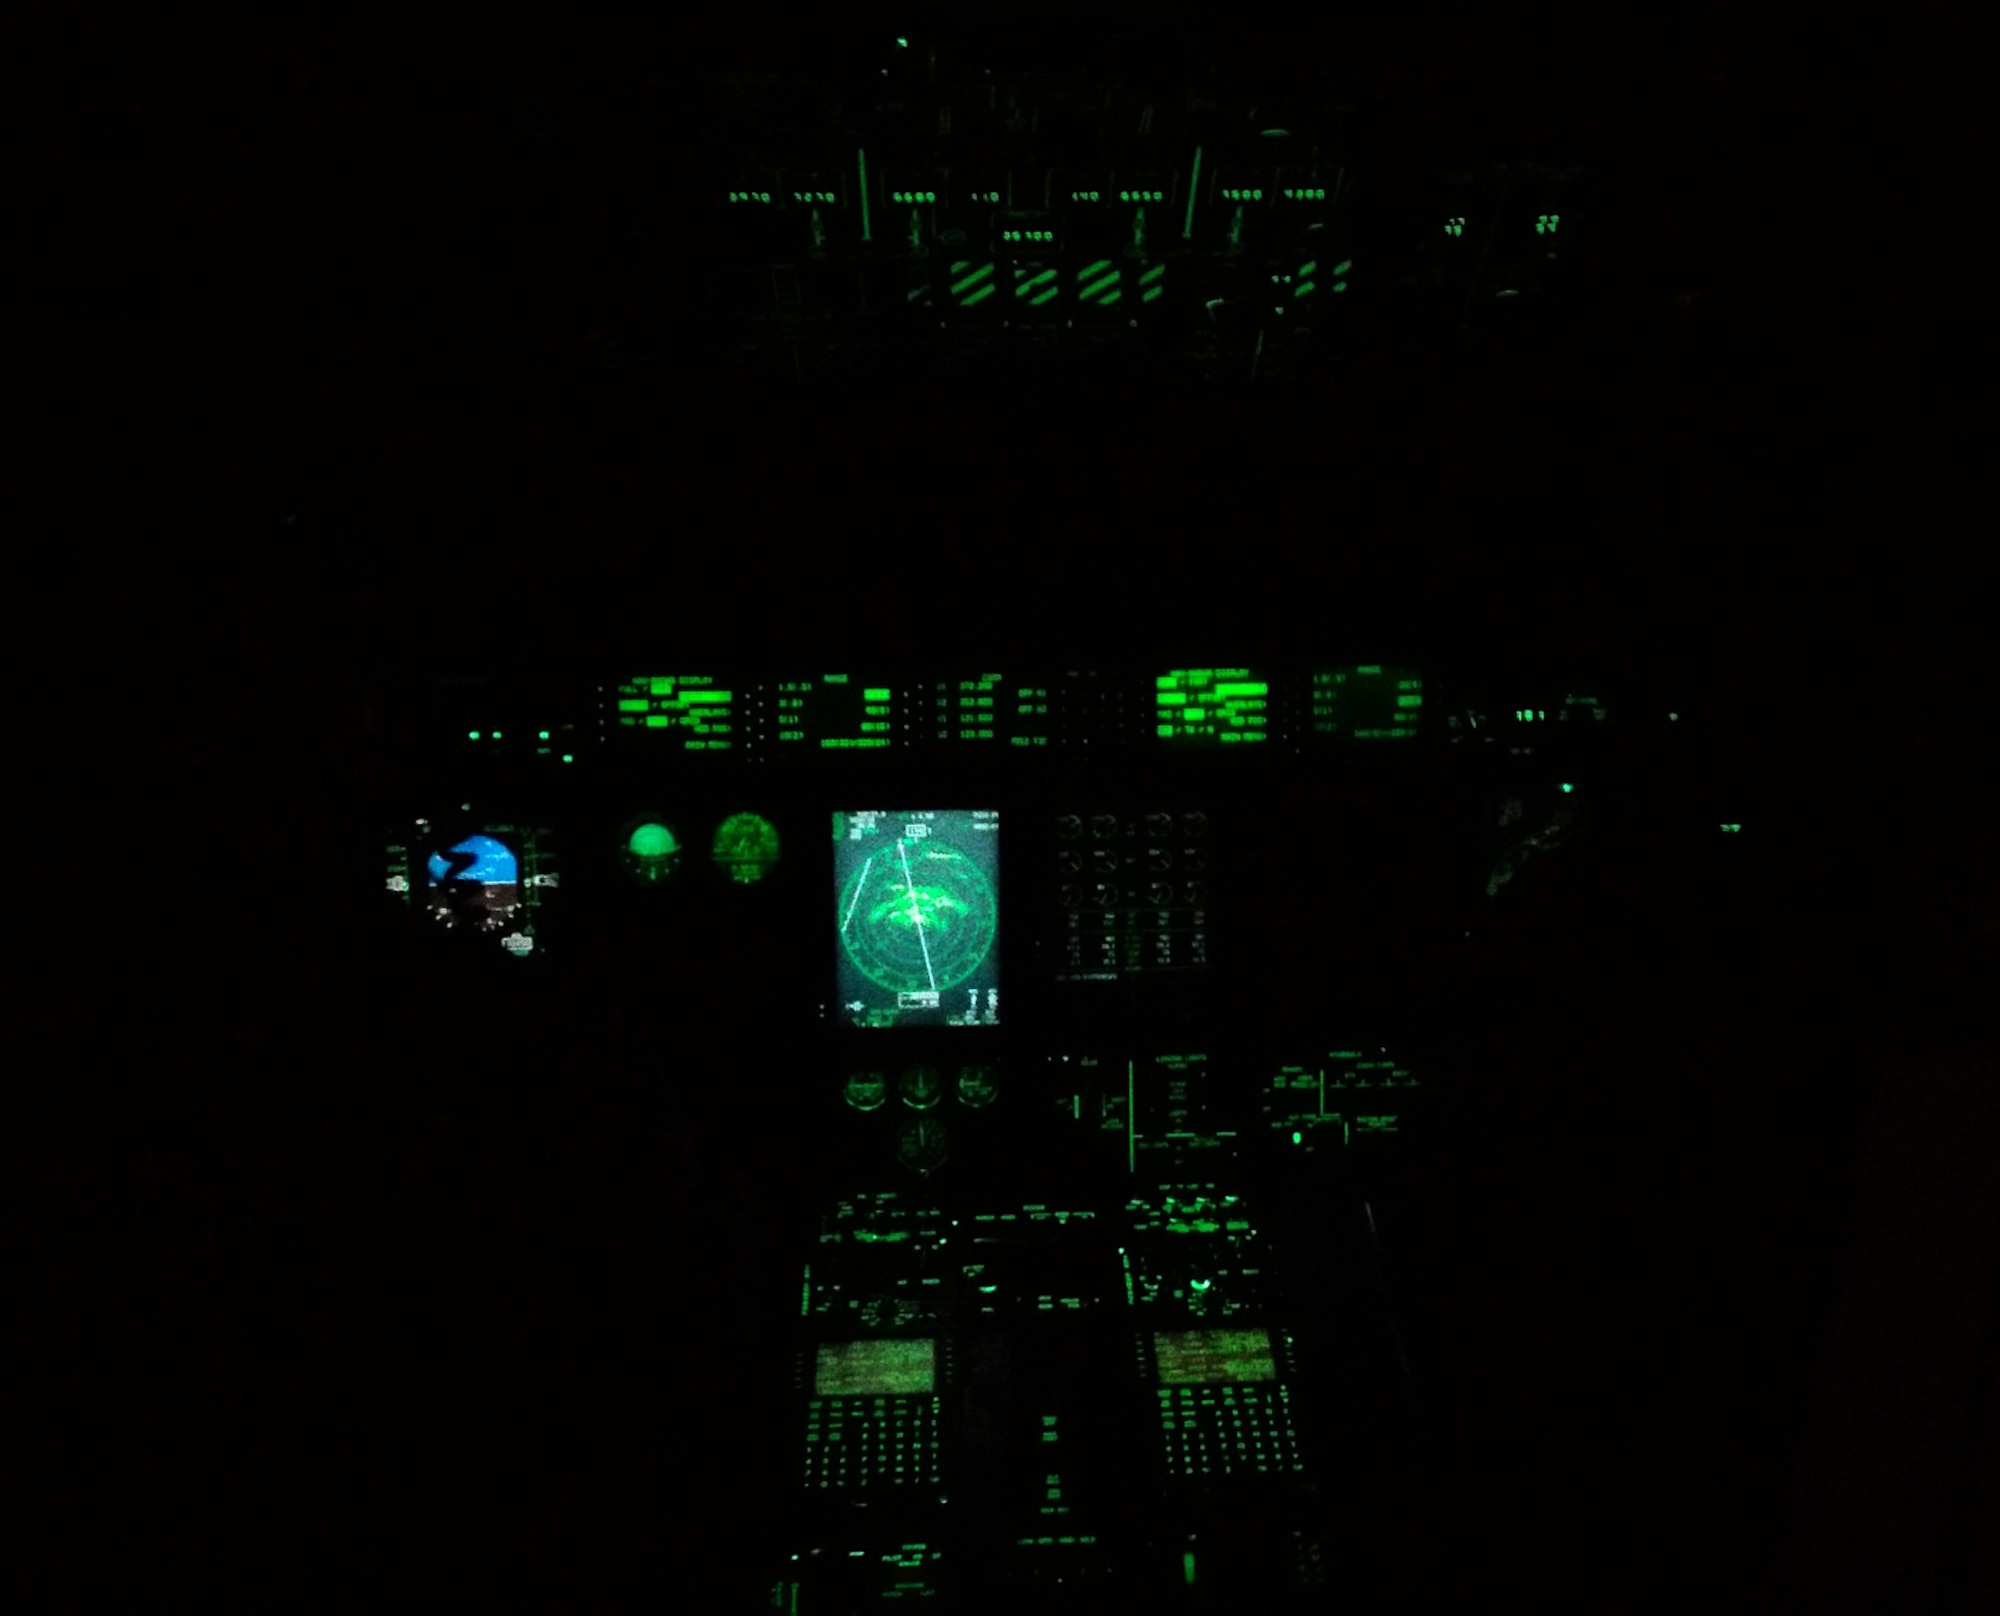 Capt. Chase Allen and Capt. Jordan Mentzer pilot through Hurricane Patricia in pitch black conditions October. 23 2015. (U.S. Air Force Photo/Master Sgt. Brian Lamar)
